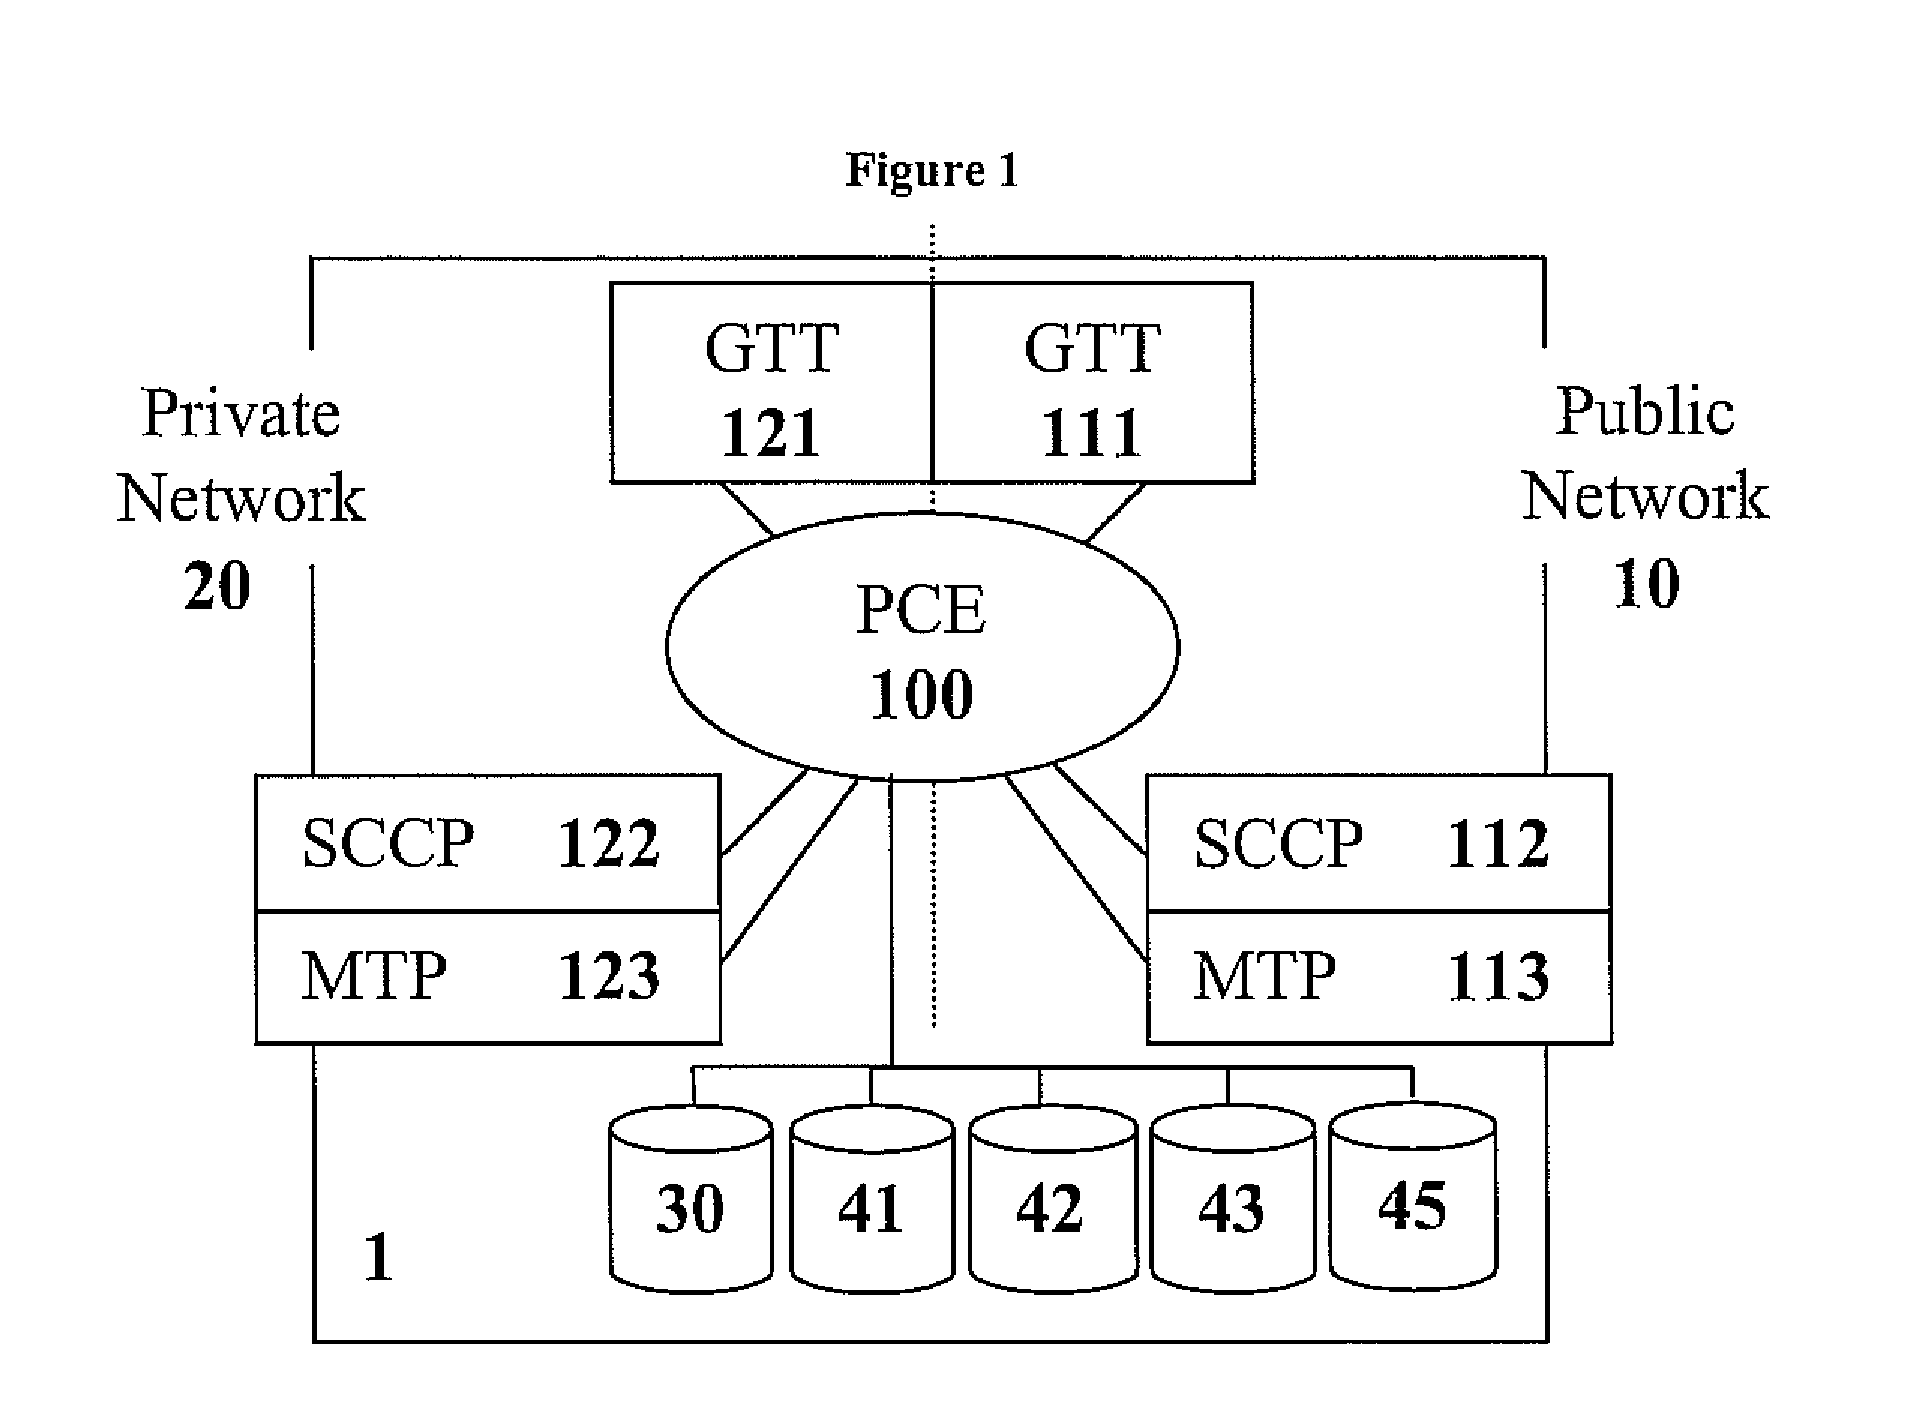 Point code emulation for common channel signaling system No. 7 signaling network